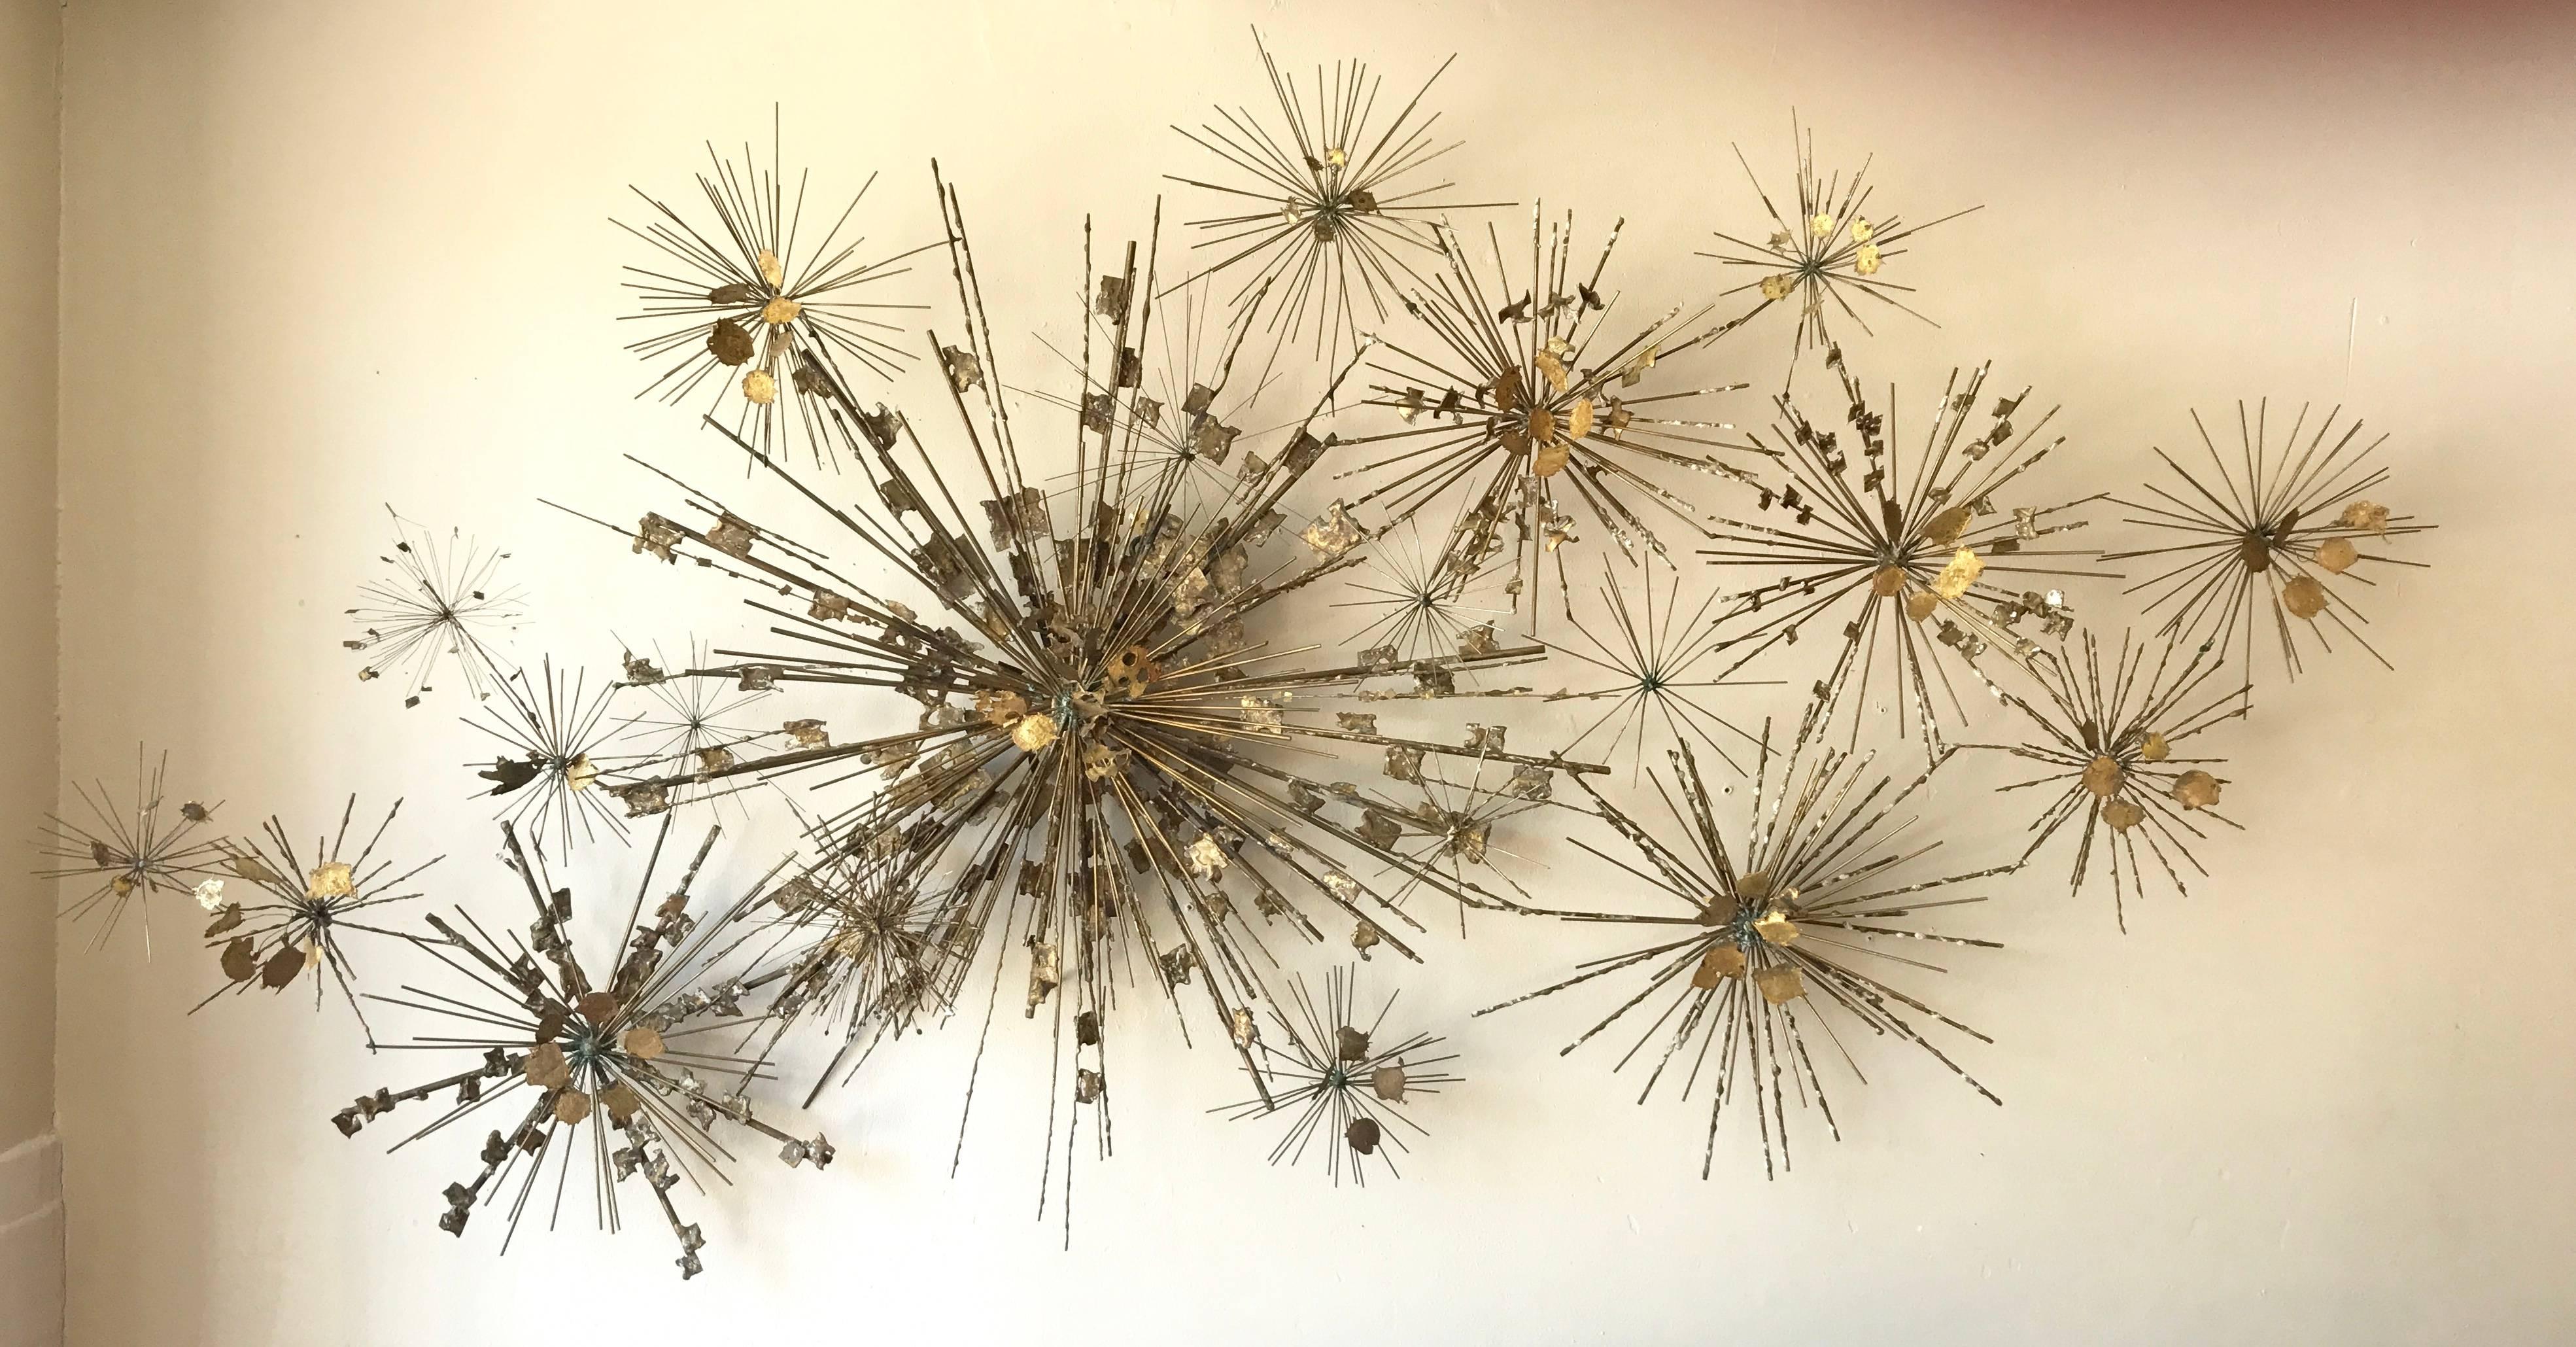 Created locally by an unknown Bay Area artist during the 1970s is this mixed metal one off wall hanging sculpture. Constructed of hundreds of brass and bronze wire rods brazed together to create an celestial body or oceanic life form. The mixture of